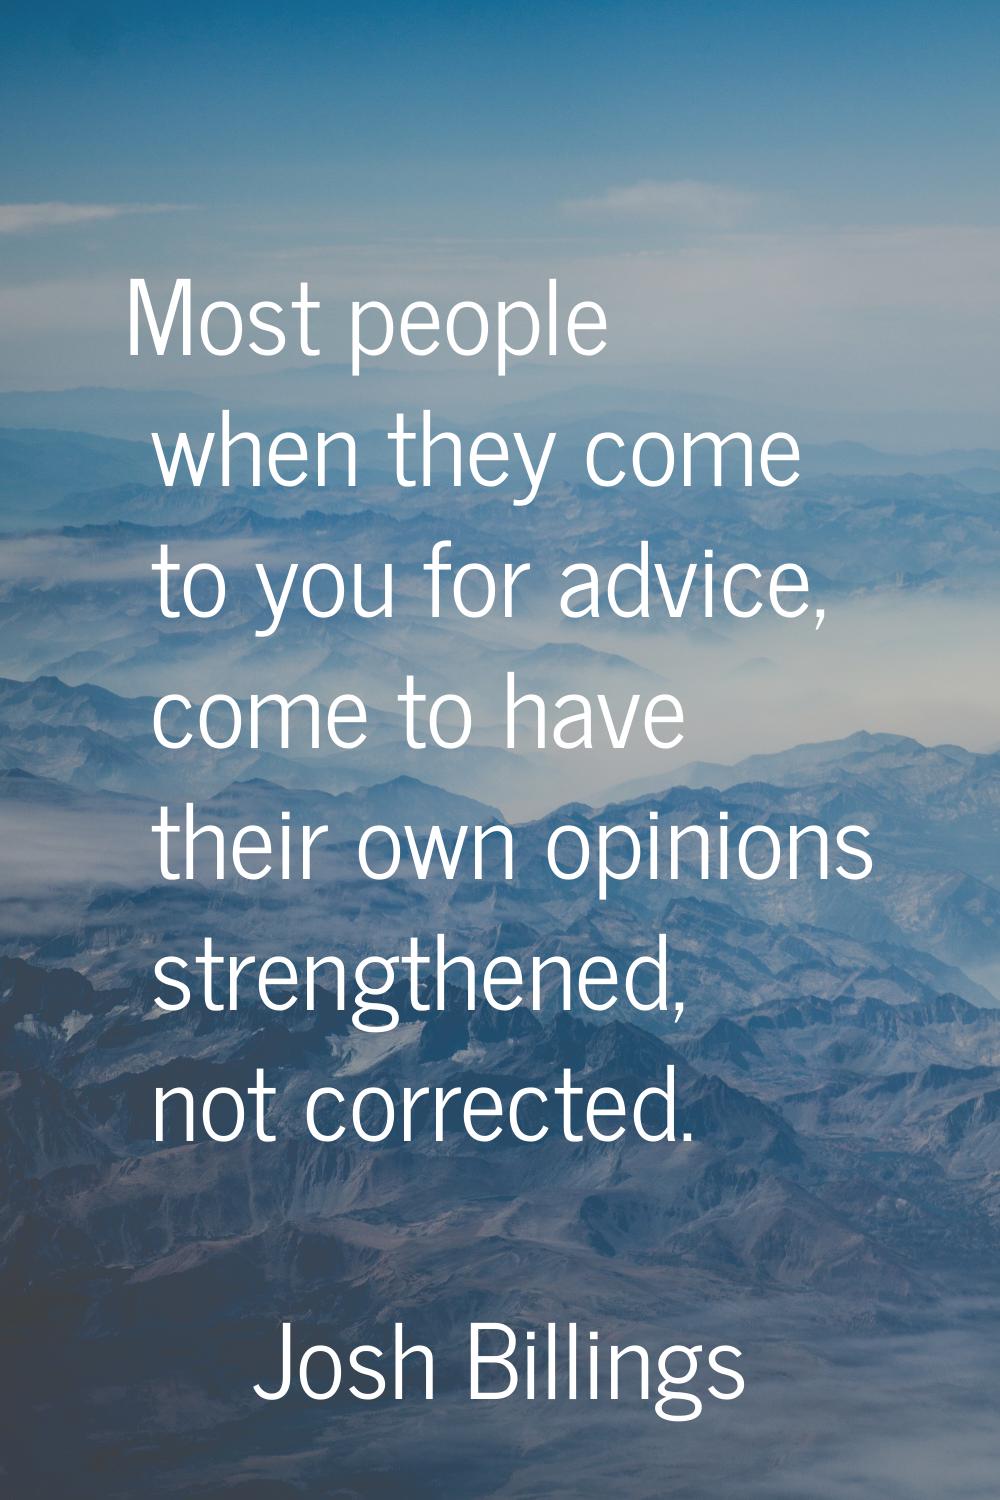 Most people when they come to you for advice, come to have their own opinions strengthened, not cor